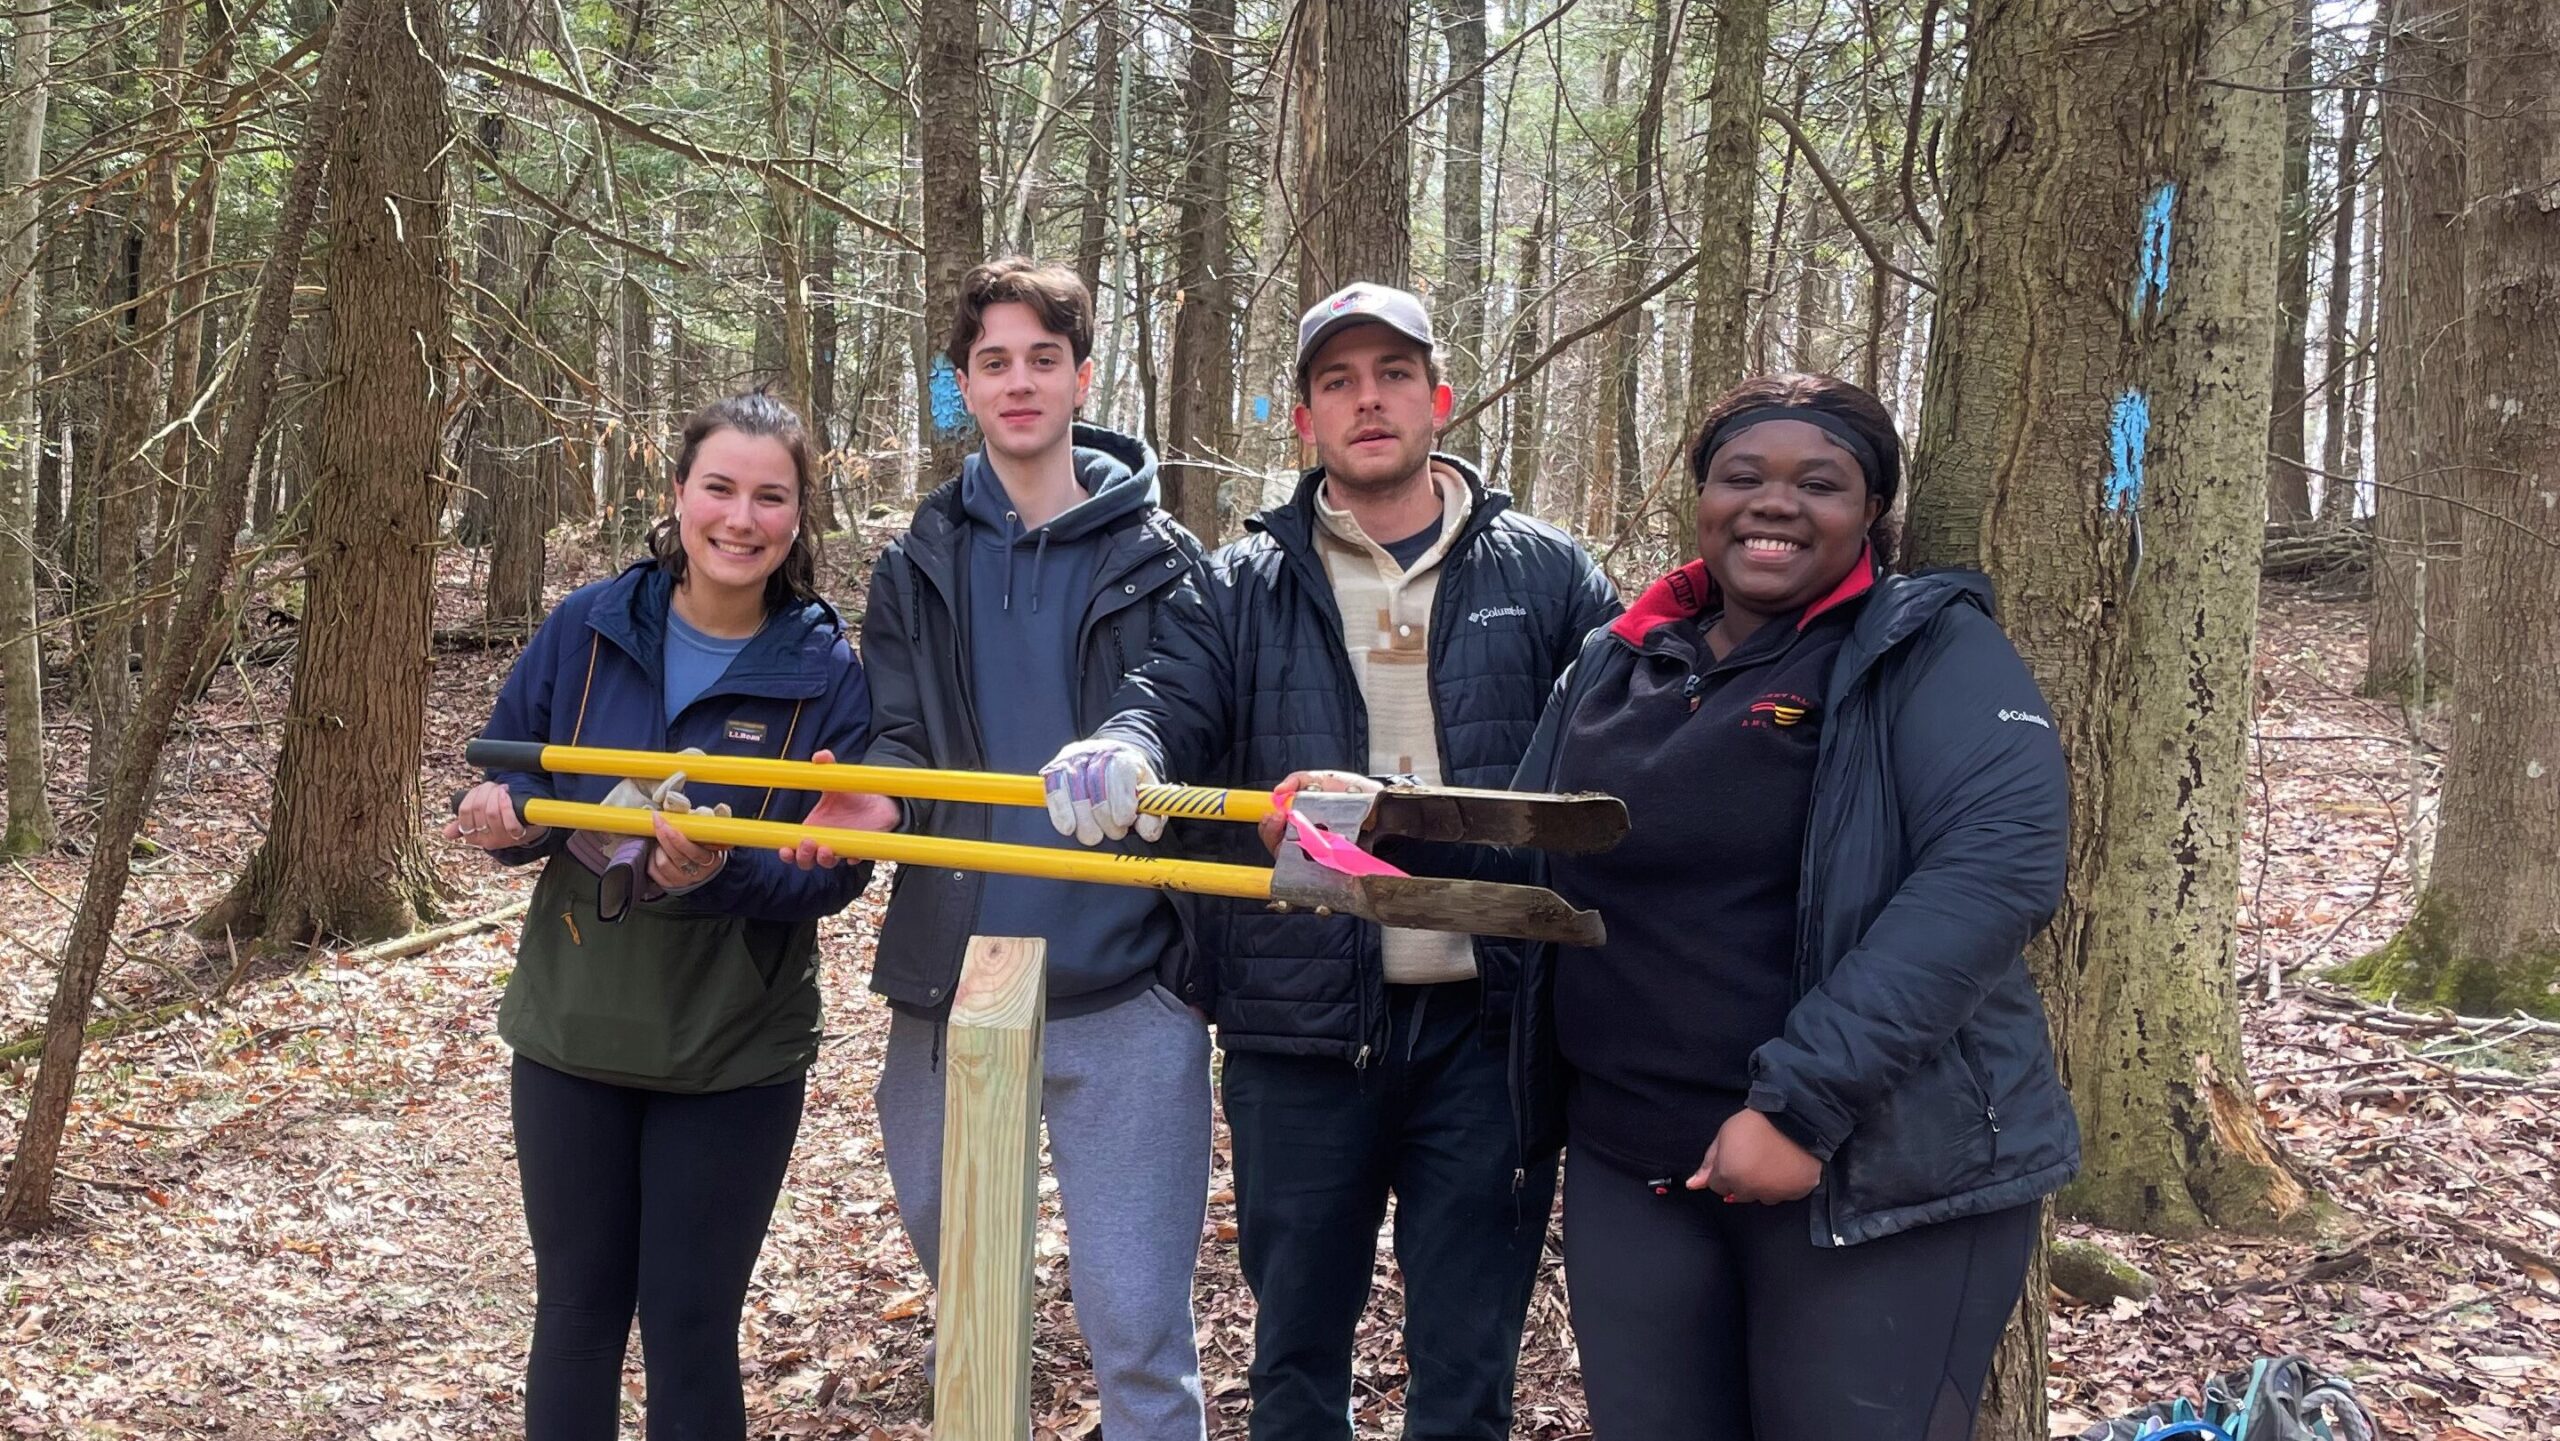 A group of four smiling college students pose behind a post in the ground, holding the post hole digger they used to make the hole. They are surrounded by forest.